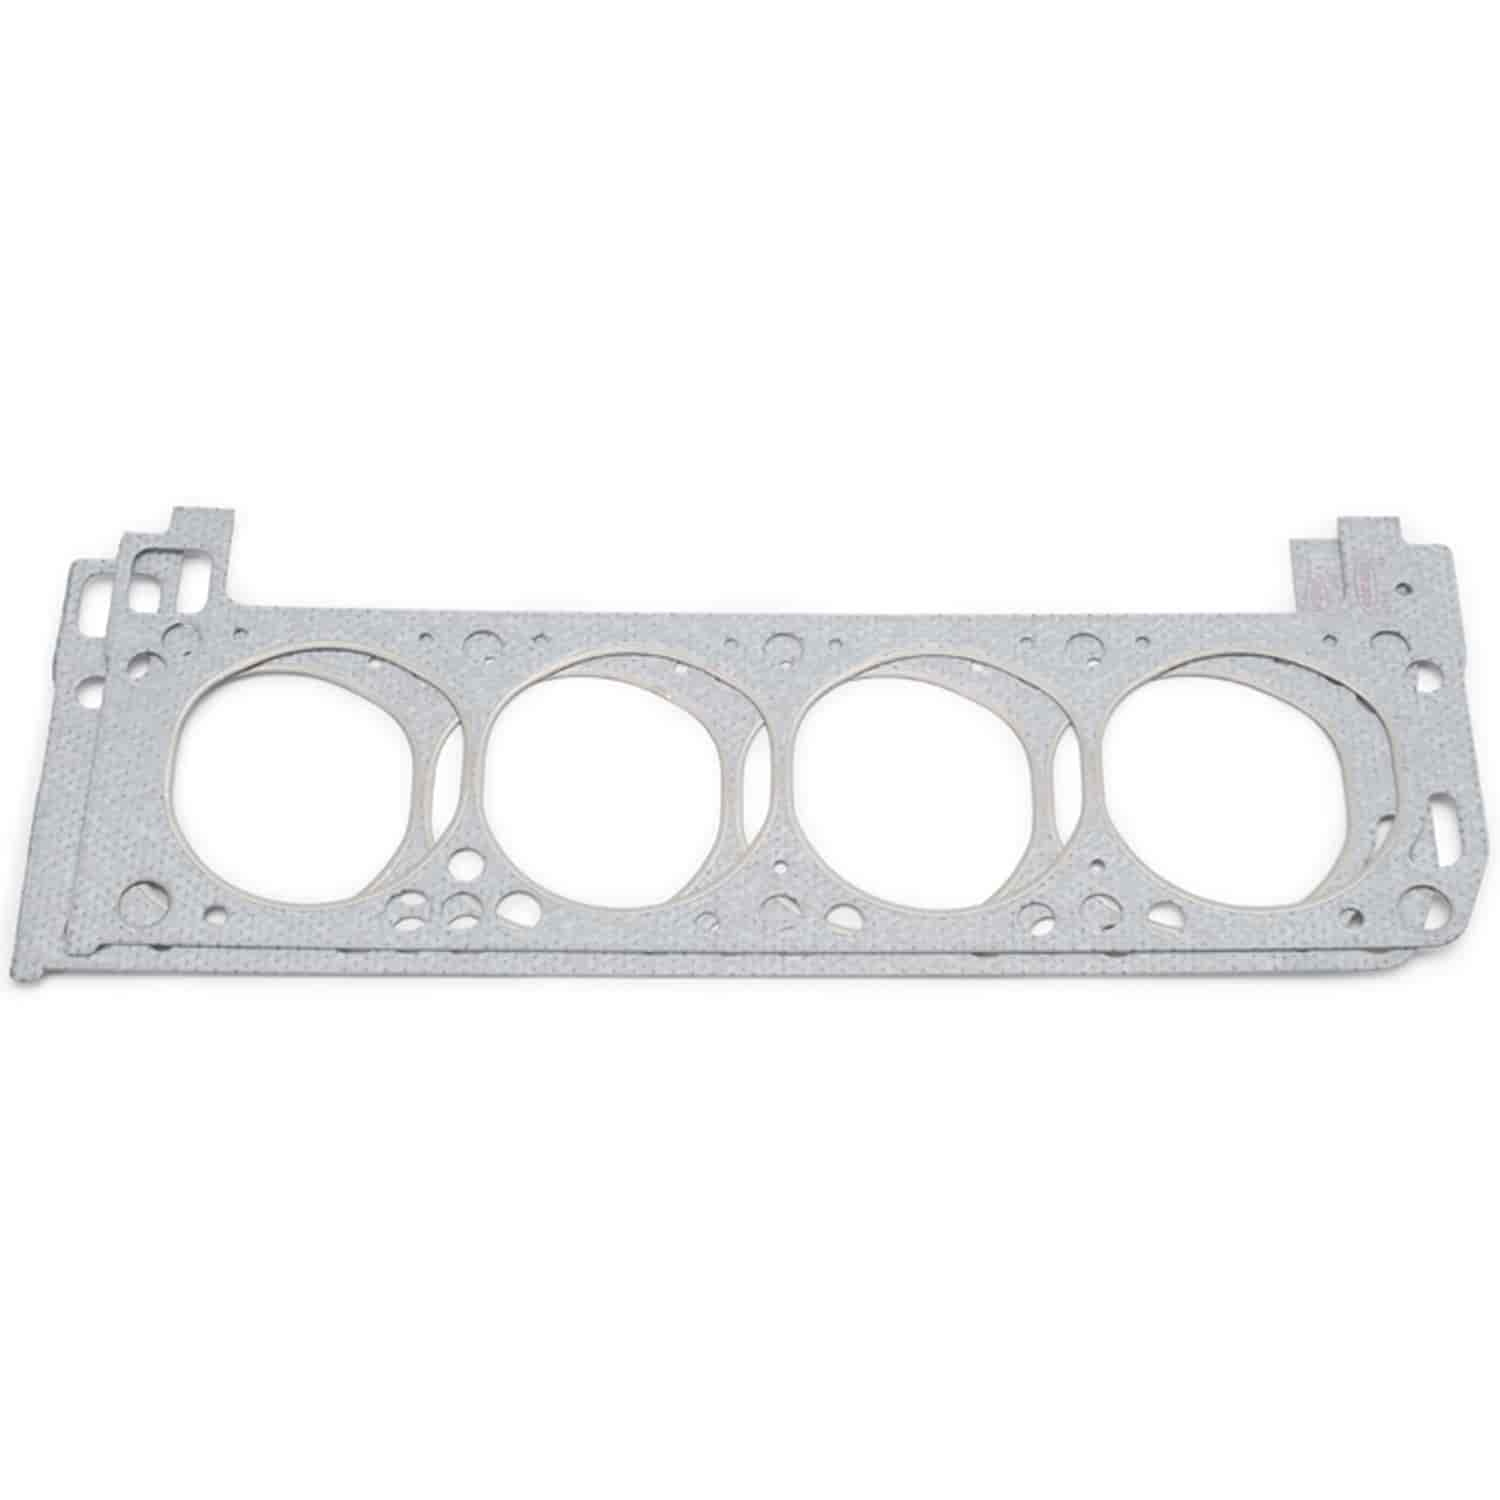 Head Gaskets for Ford Cleveland 351C